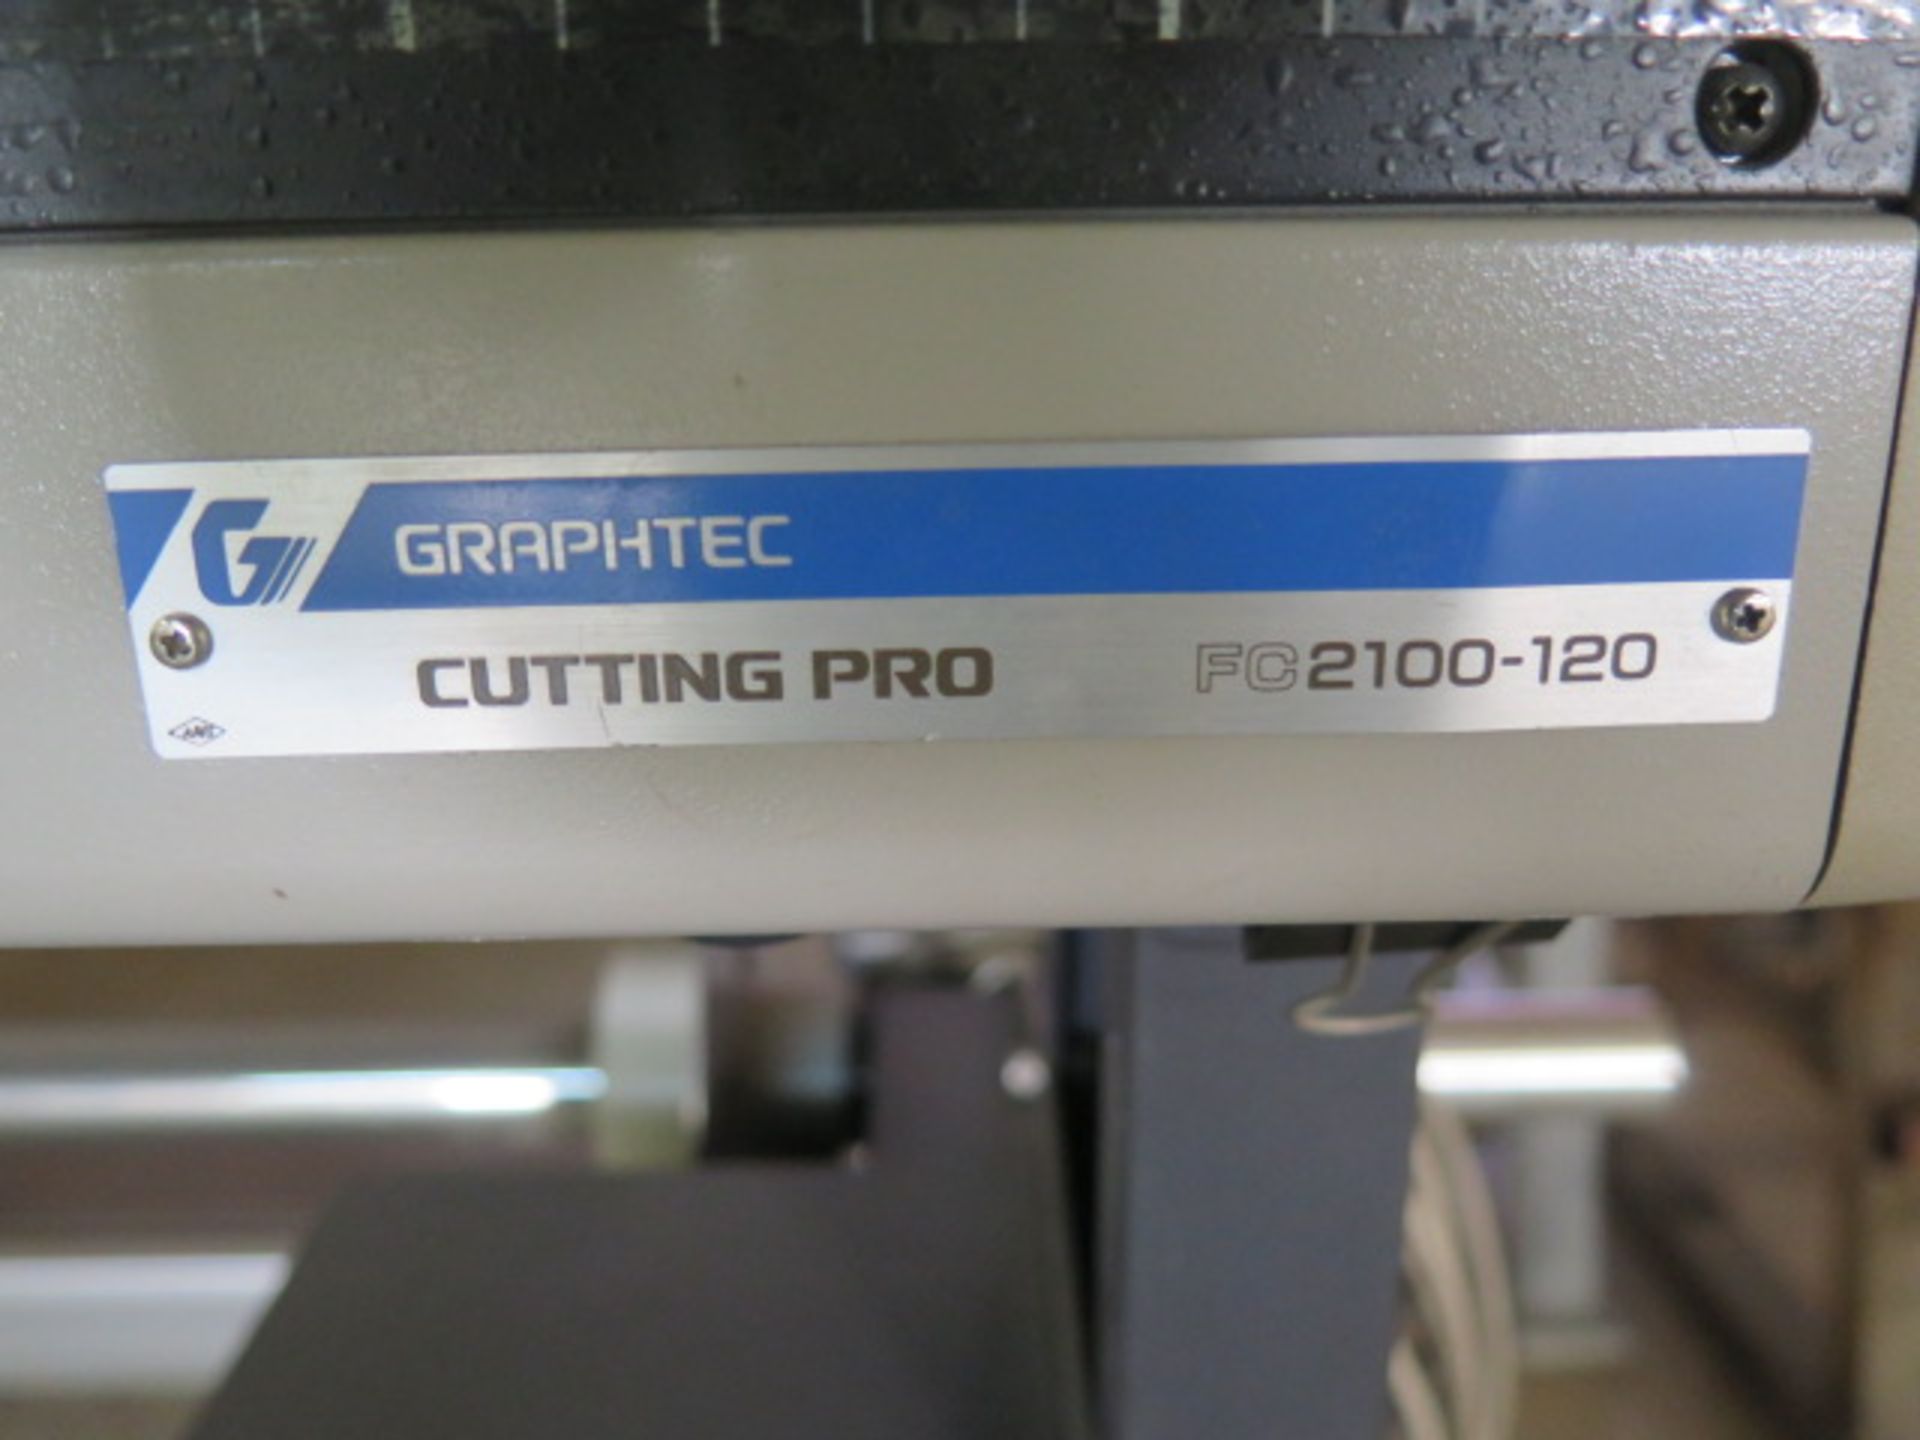 Graftec "Cutter Pro" FC2100-120 Cutter Plotter - Image 4 of 4